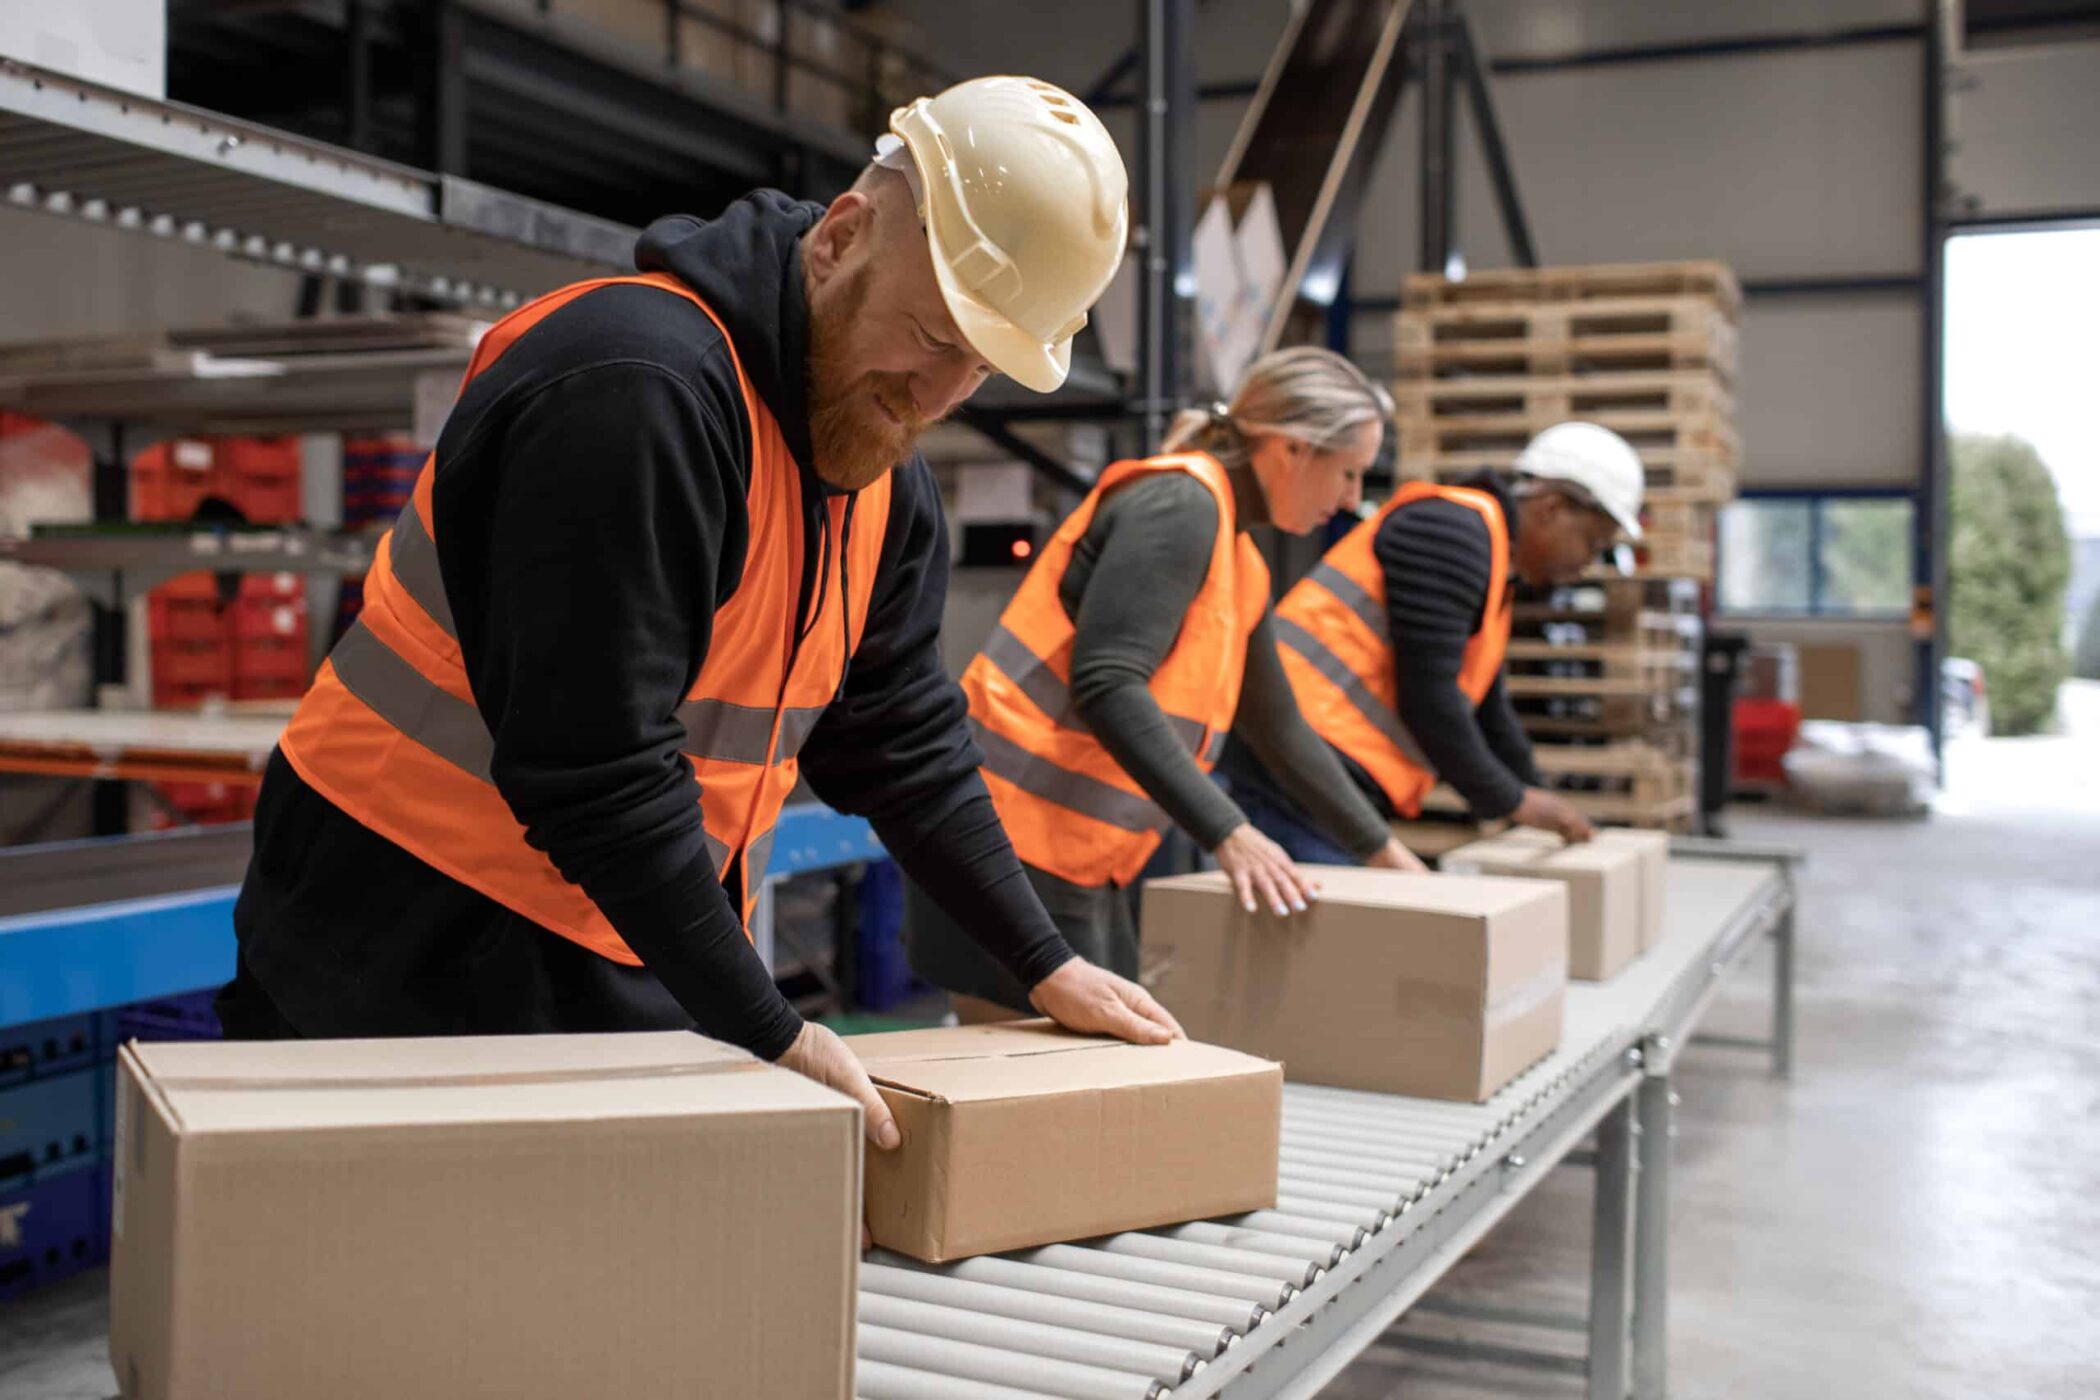 Three warehouse workers on a packing and delivery production line